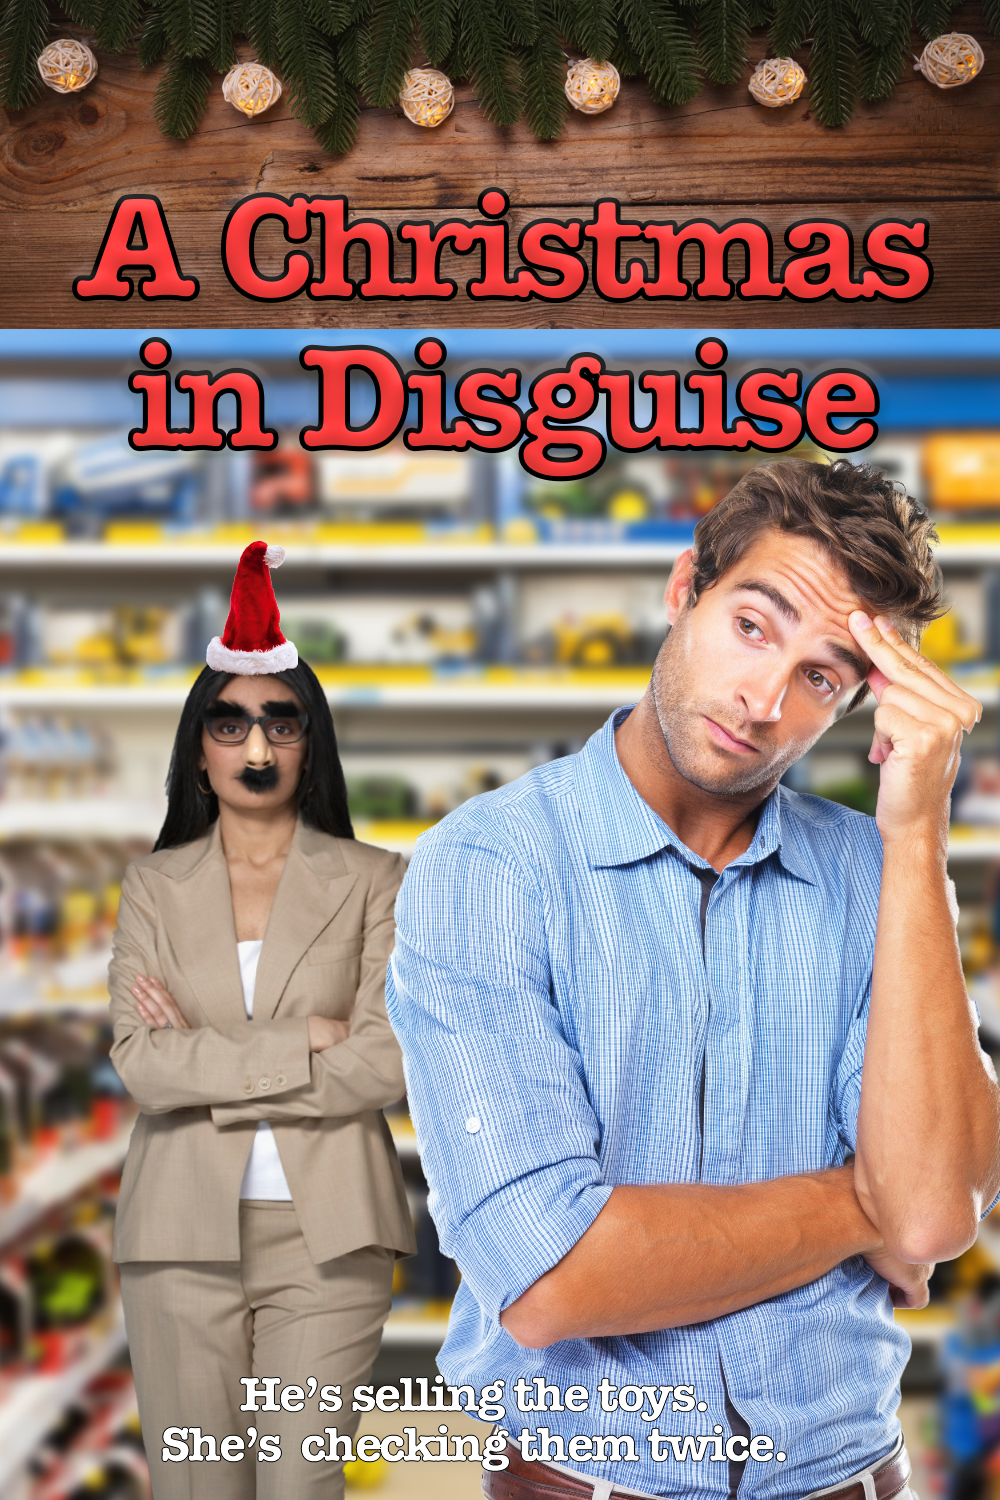 A Christmas in Disguise